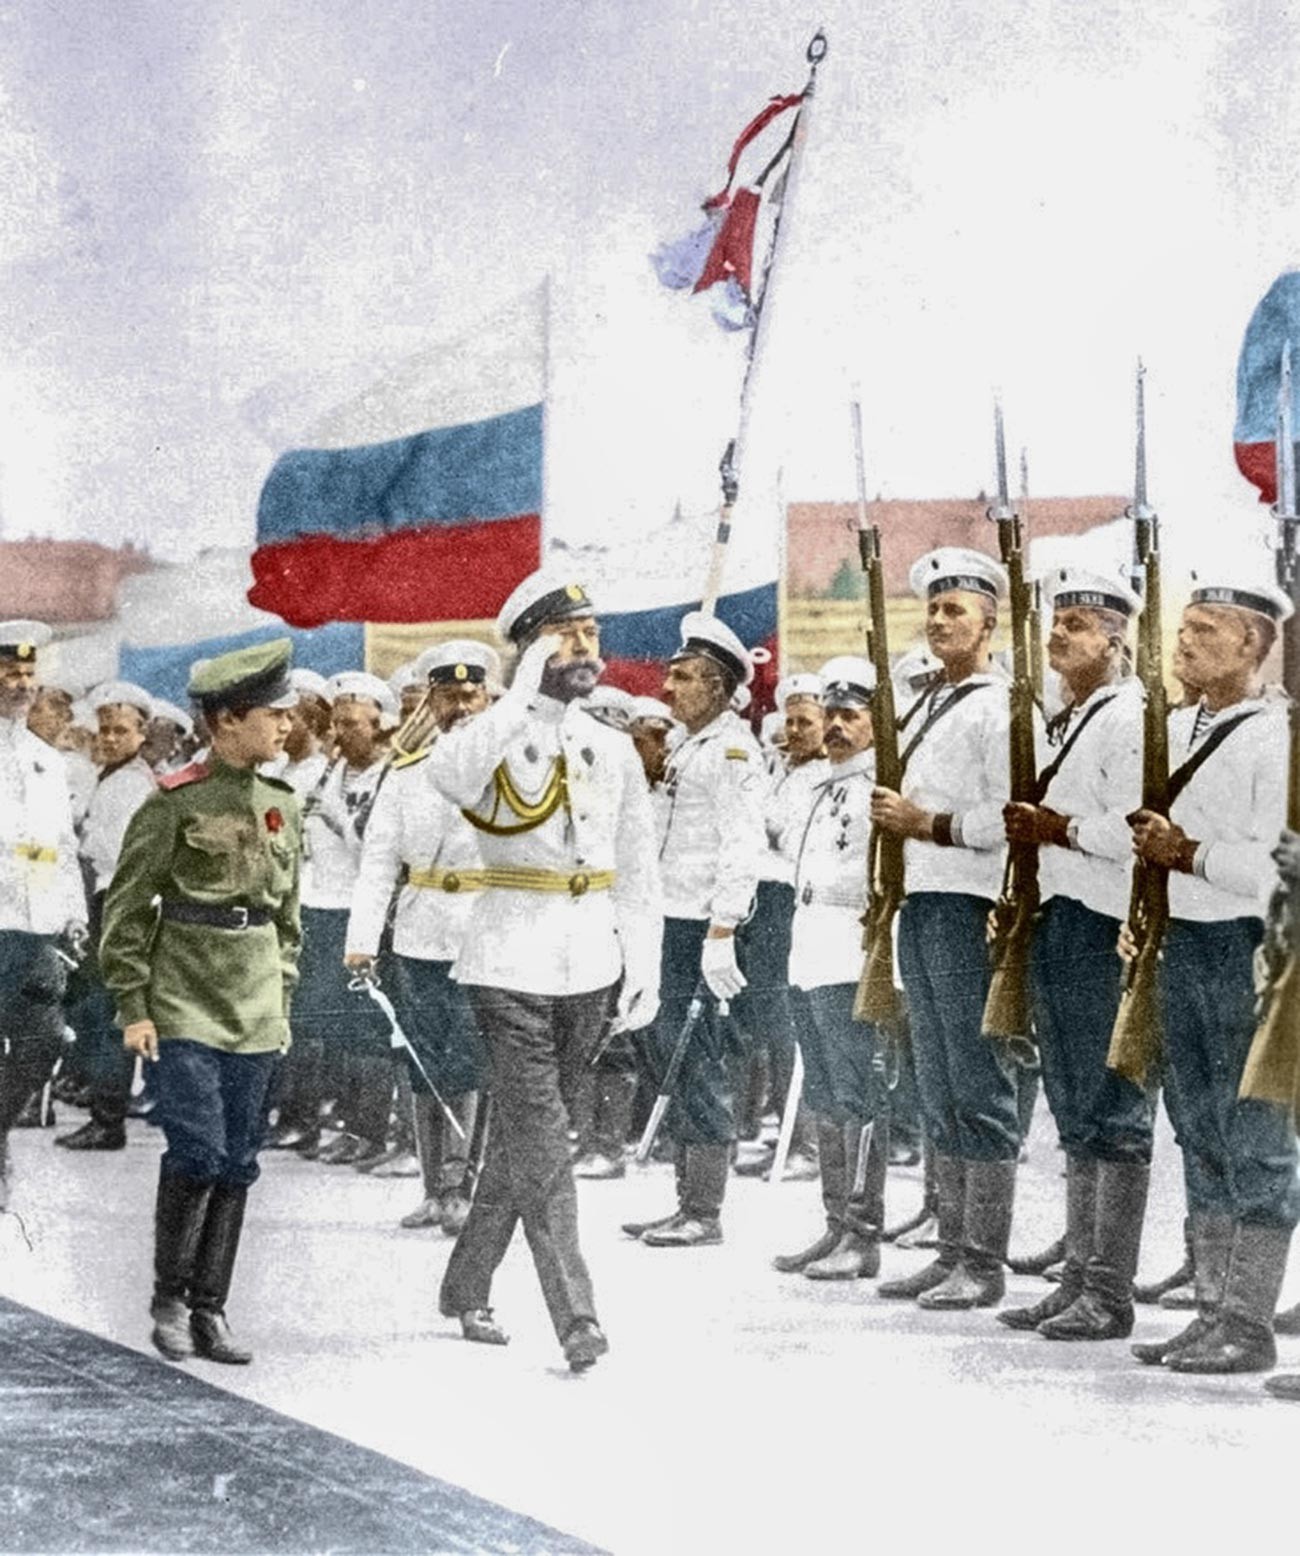 Nicholas II set the white-blue-red flag as a national Russian flag in 1896 